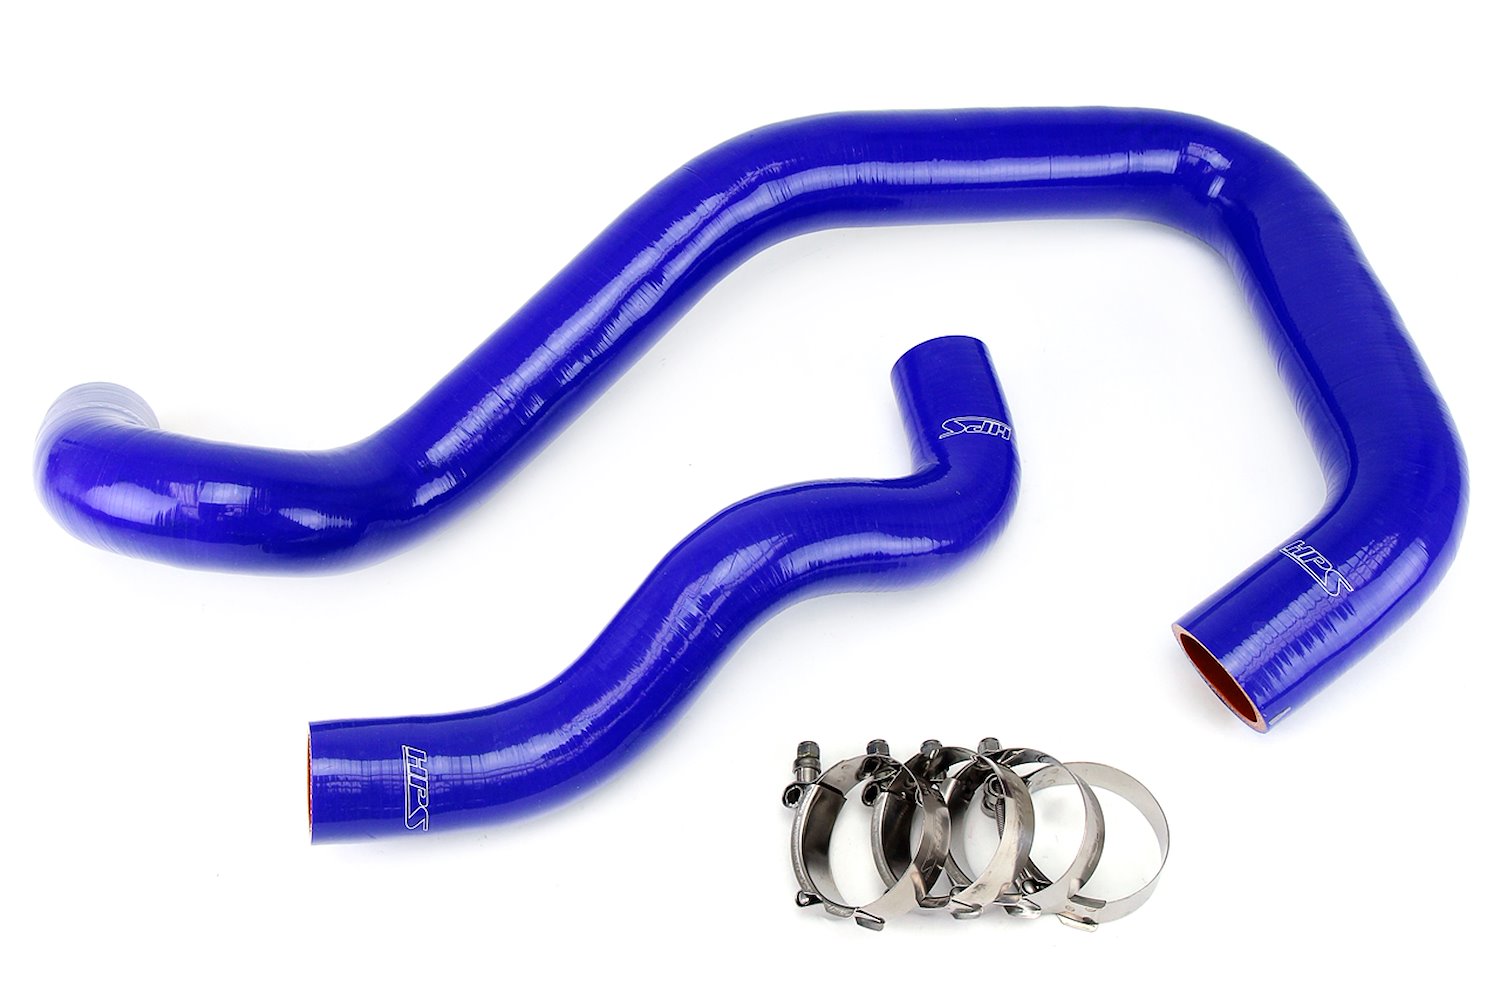 57-1214-BLUE Radiator Hose Kit, High-Temp 3-Ply Reinforced Silicone, Replace OEM Rubber Radiator Coolant Hoses